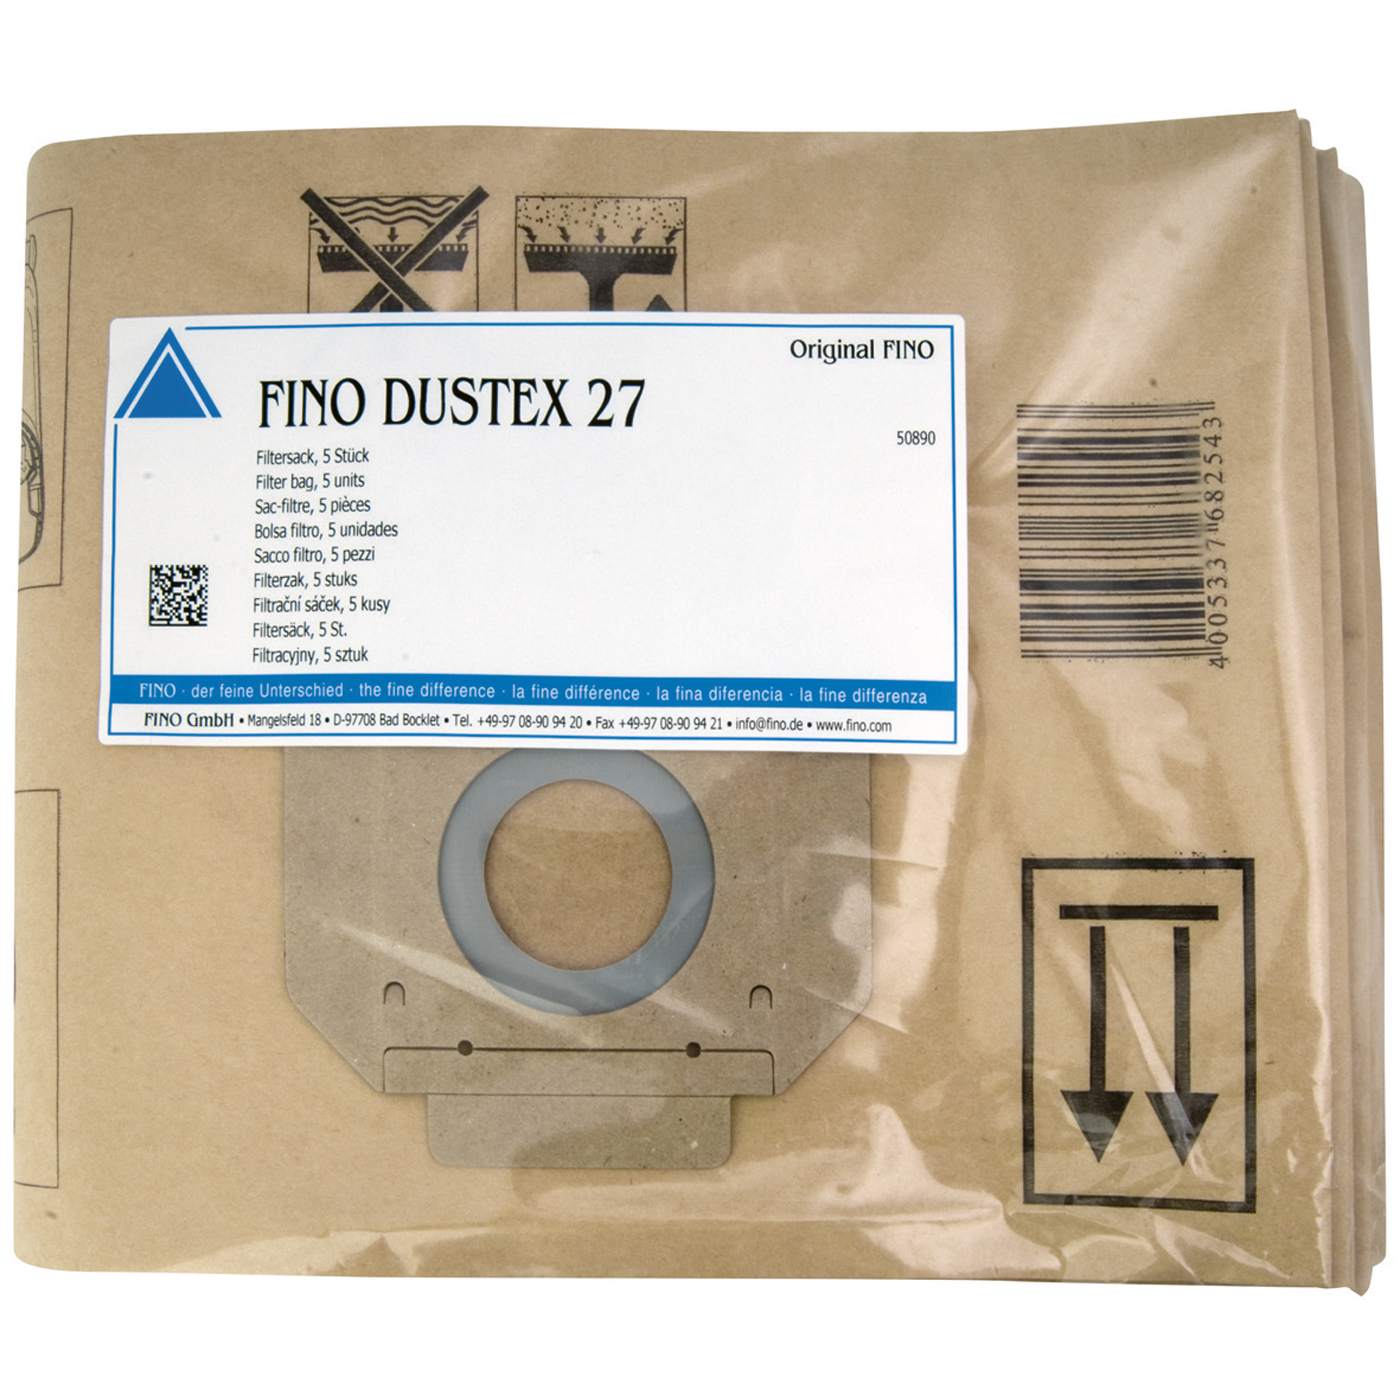 Filter Bags, for FINO DUSTEX 27 - 5 pieces